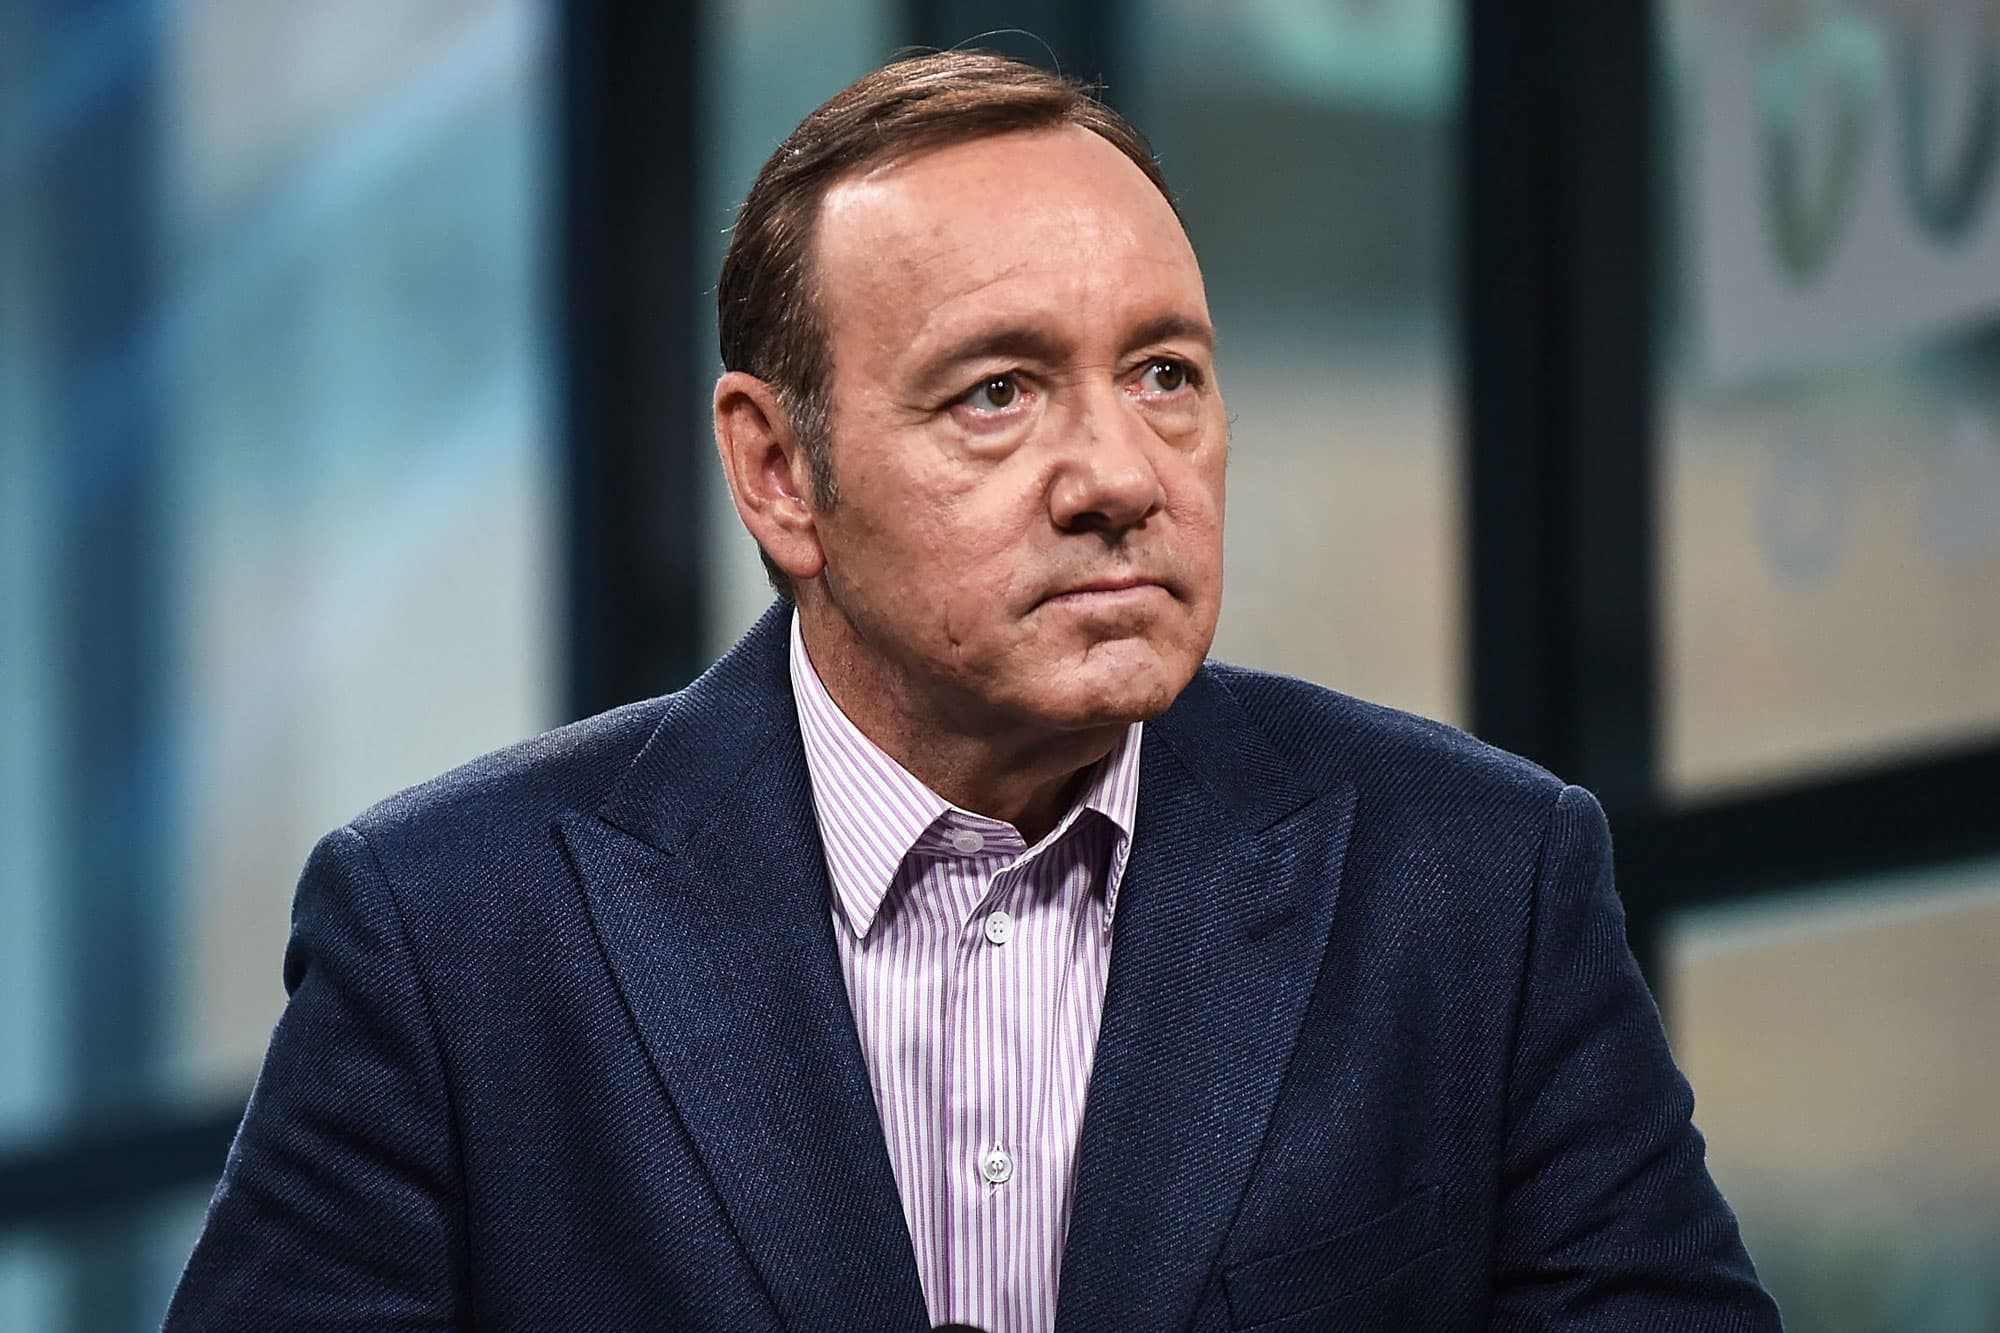 Kevin Spacey Faces Backlash For Convention Appearance